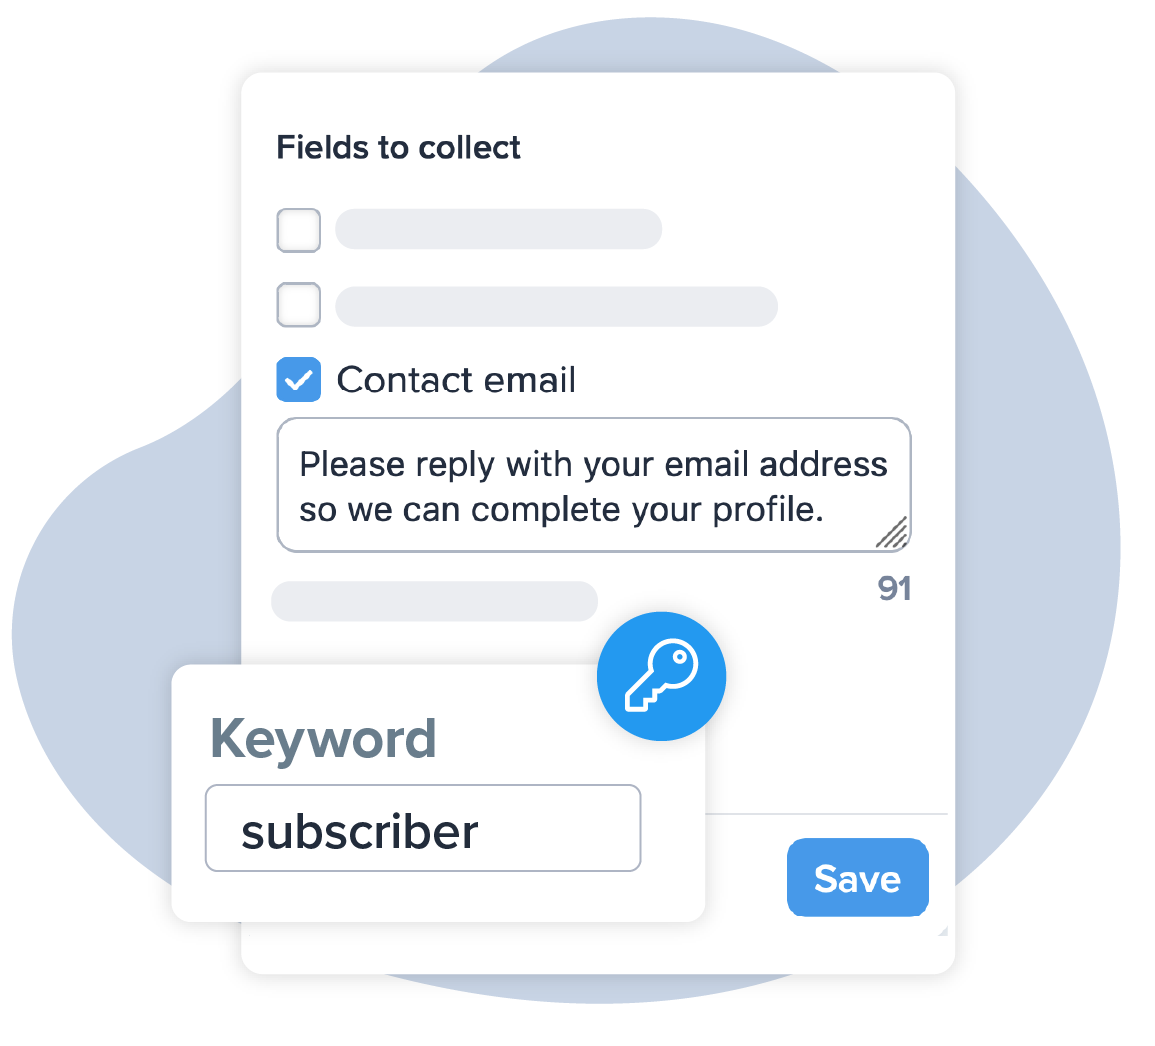 Invite SMS contacts to subscribe to your emails with Data Collection